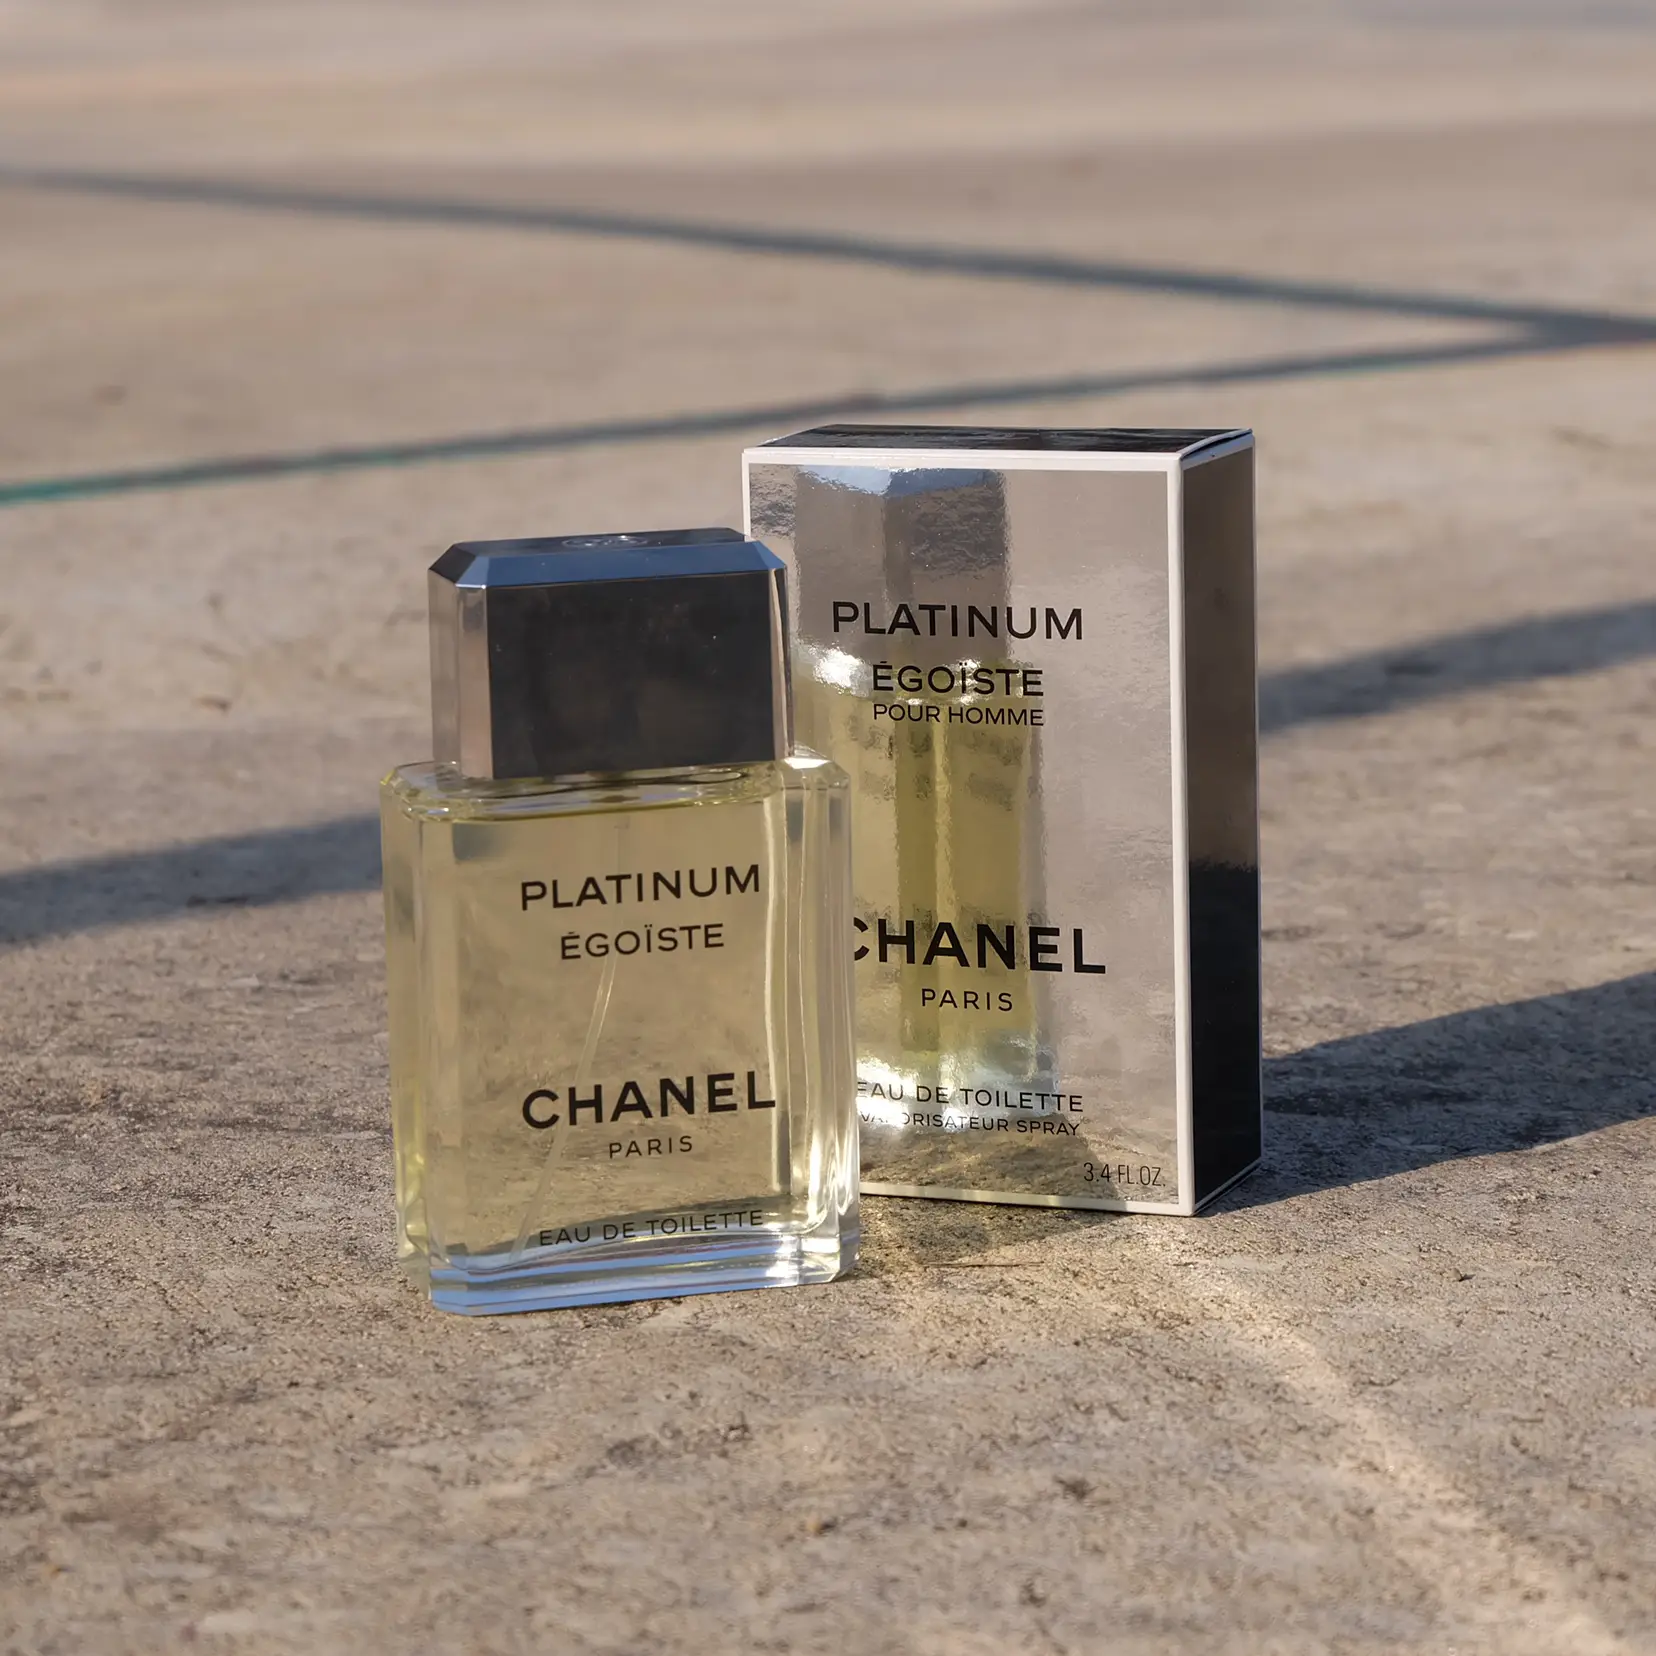 Chanel Perfume Review Executive Look Handsome Fragrance Expensive Fragrance  Confused, Gallery posted by Scented Story